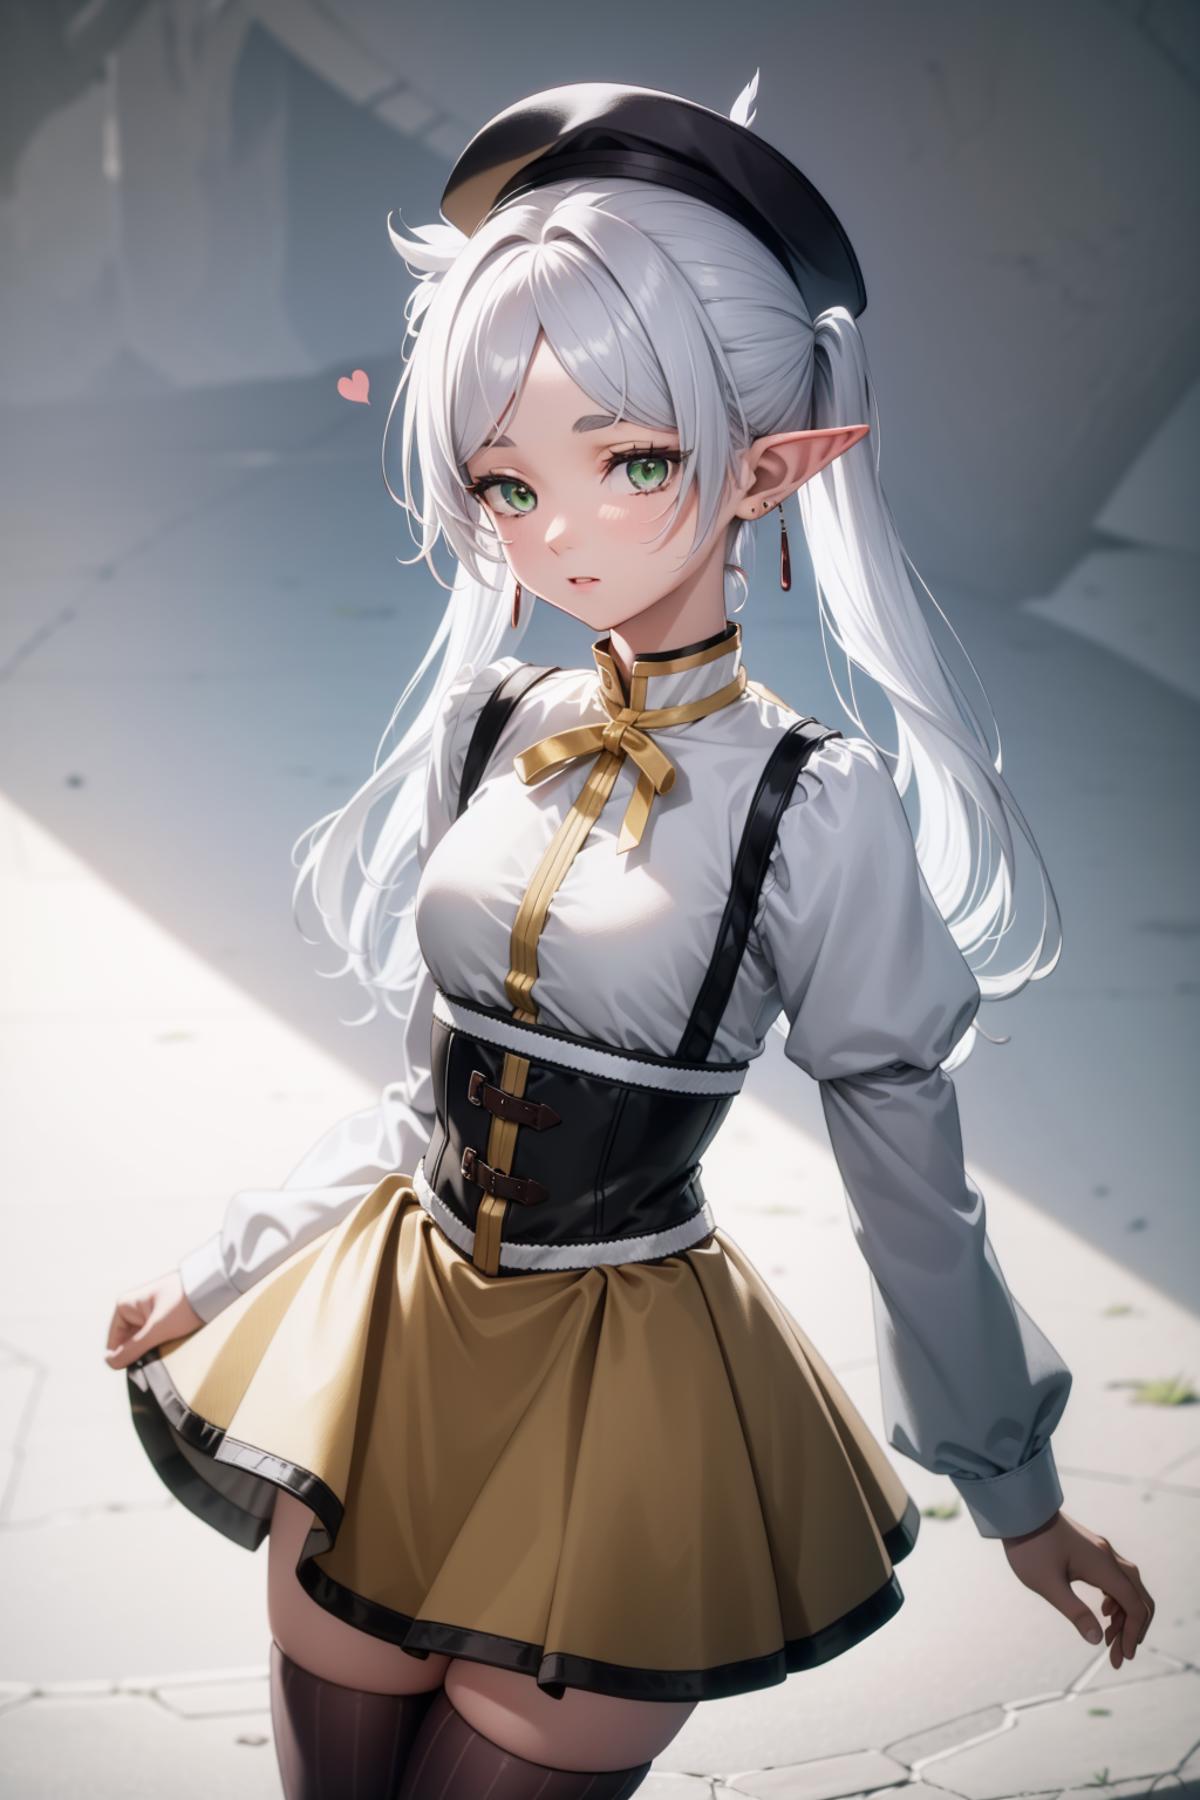 AI model image by fansay